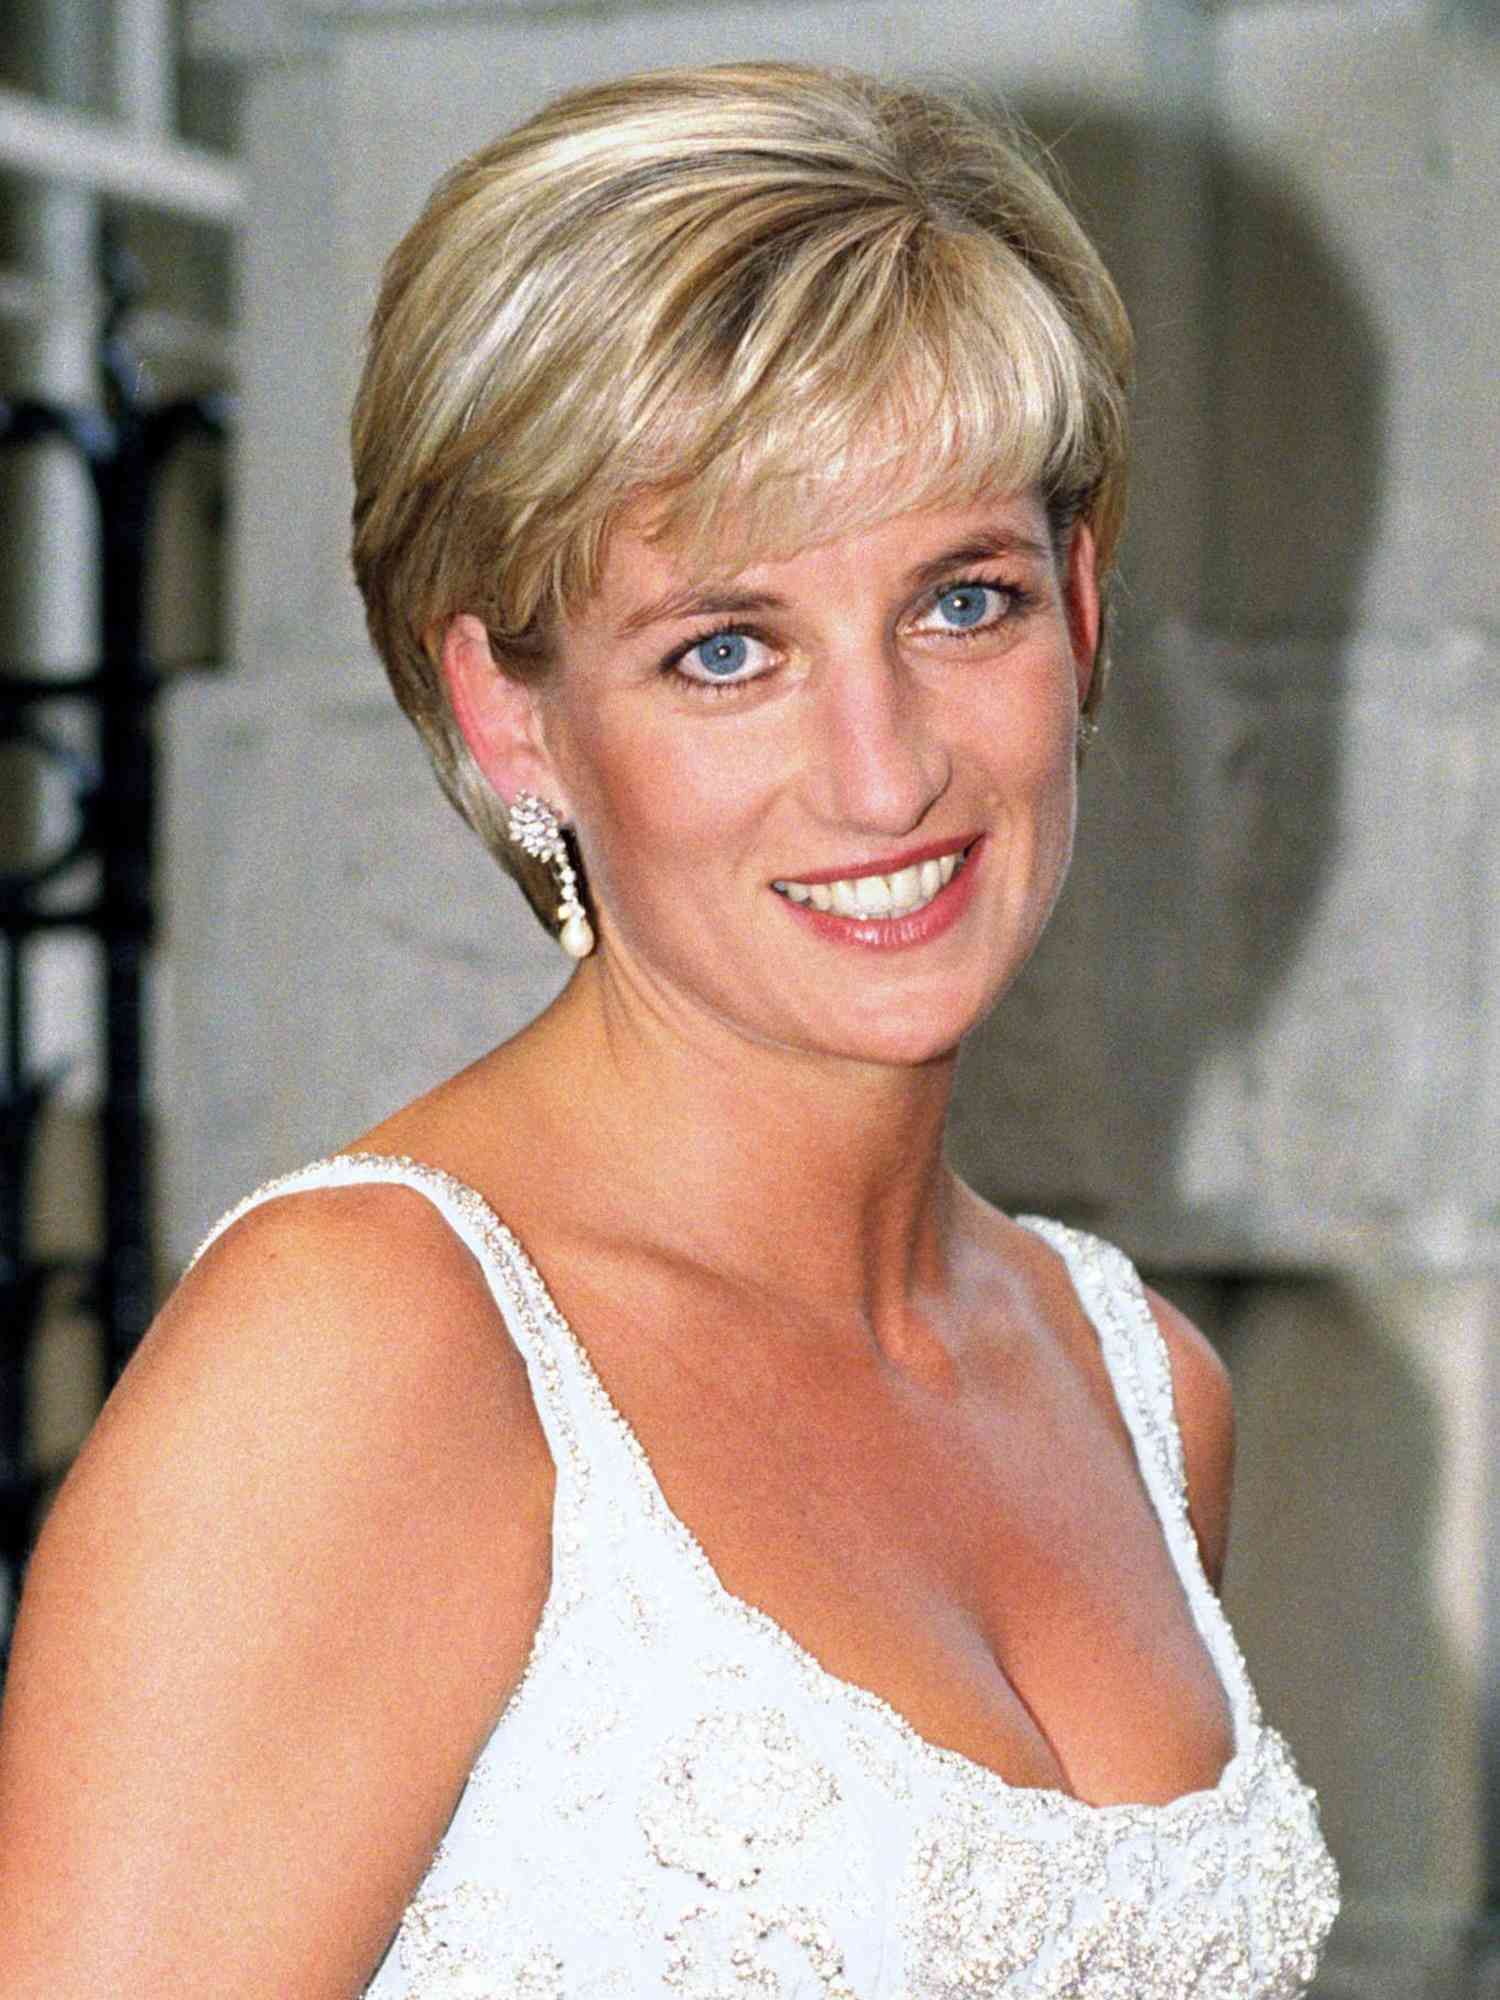 Princess Diana wears a sleek long pixie cut with bangs, pearl drop earrings, and blue dress with white beading